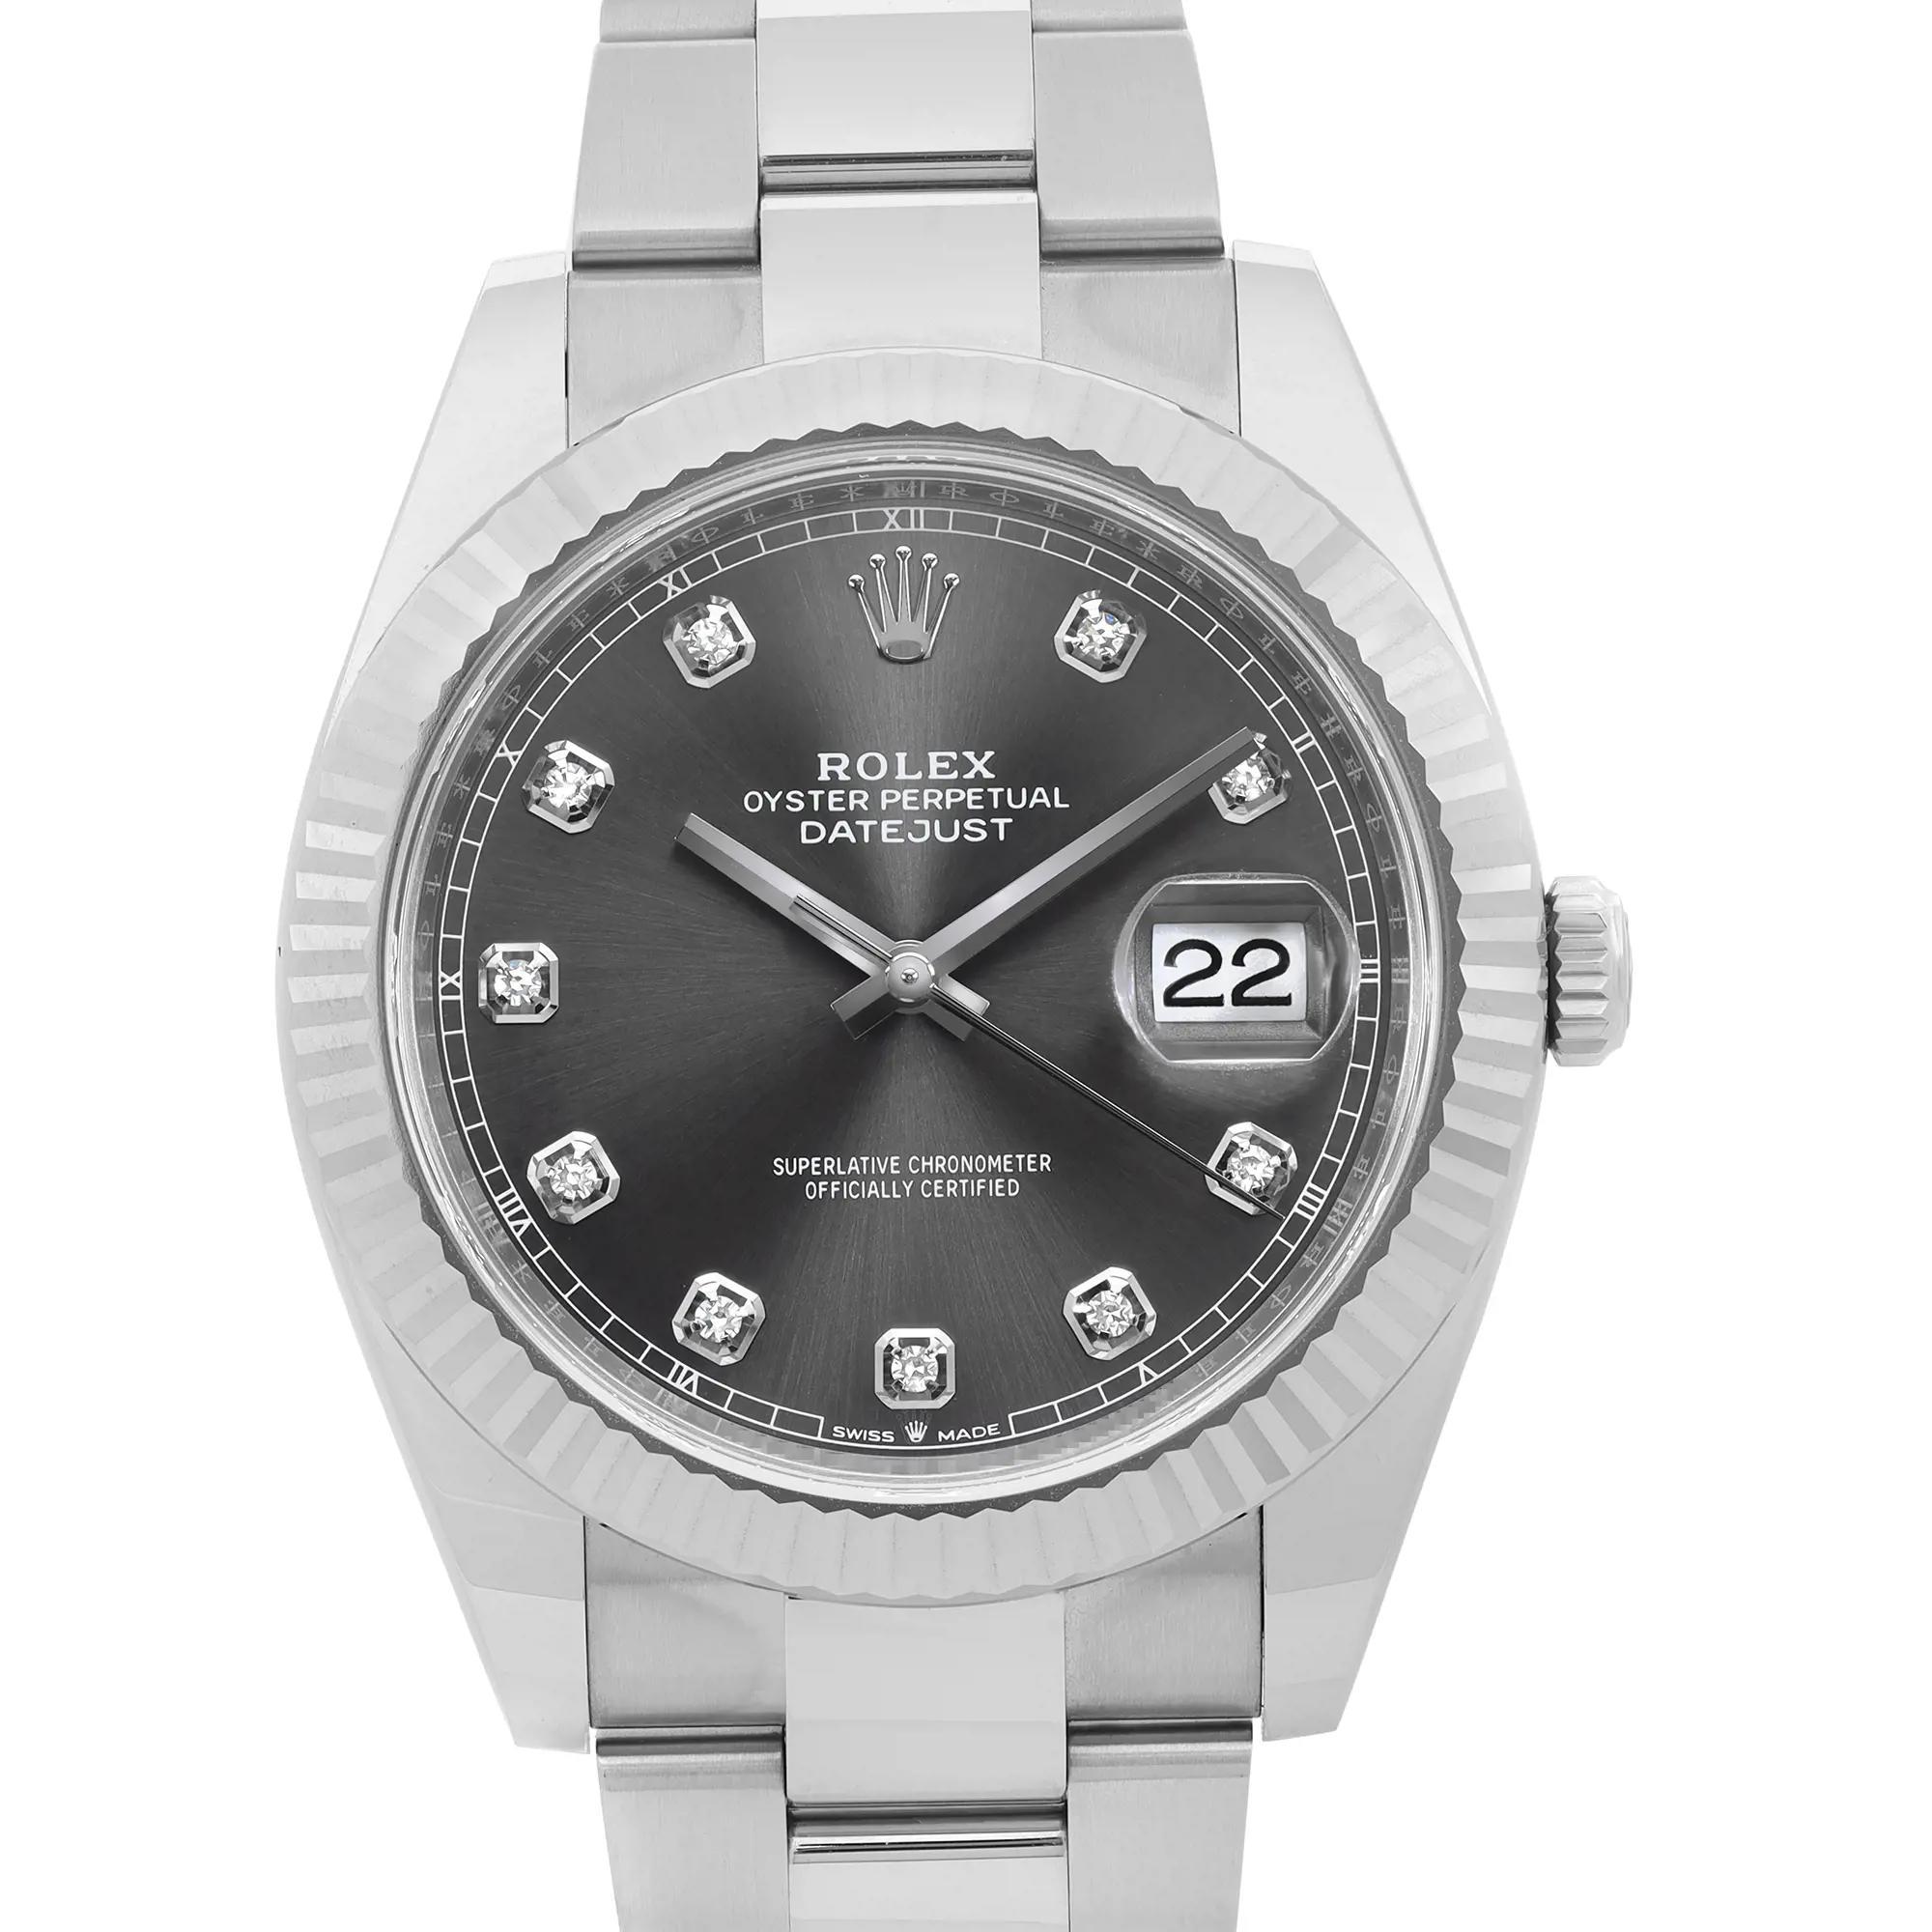 The watch is in excellent condition. 2019 dated card. Comes with an original box and paper.

Brand: Rolex  Type: Wristwatch  Department: Men  Model Number: 126334  Country/Region of Manufacture: Switzerland  Style: Luxury  Model: Rolex Datejust